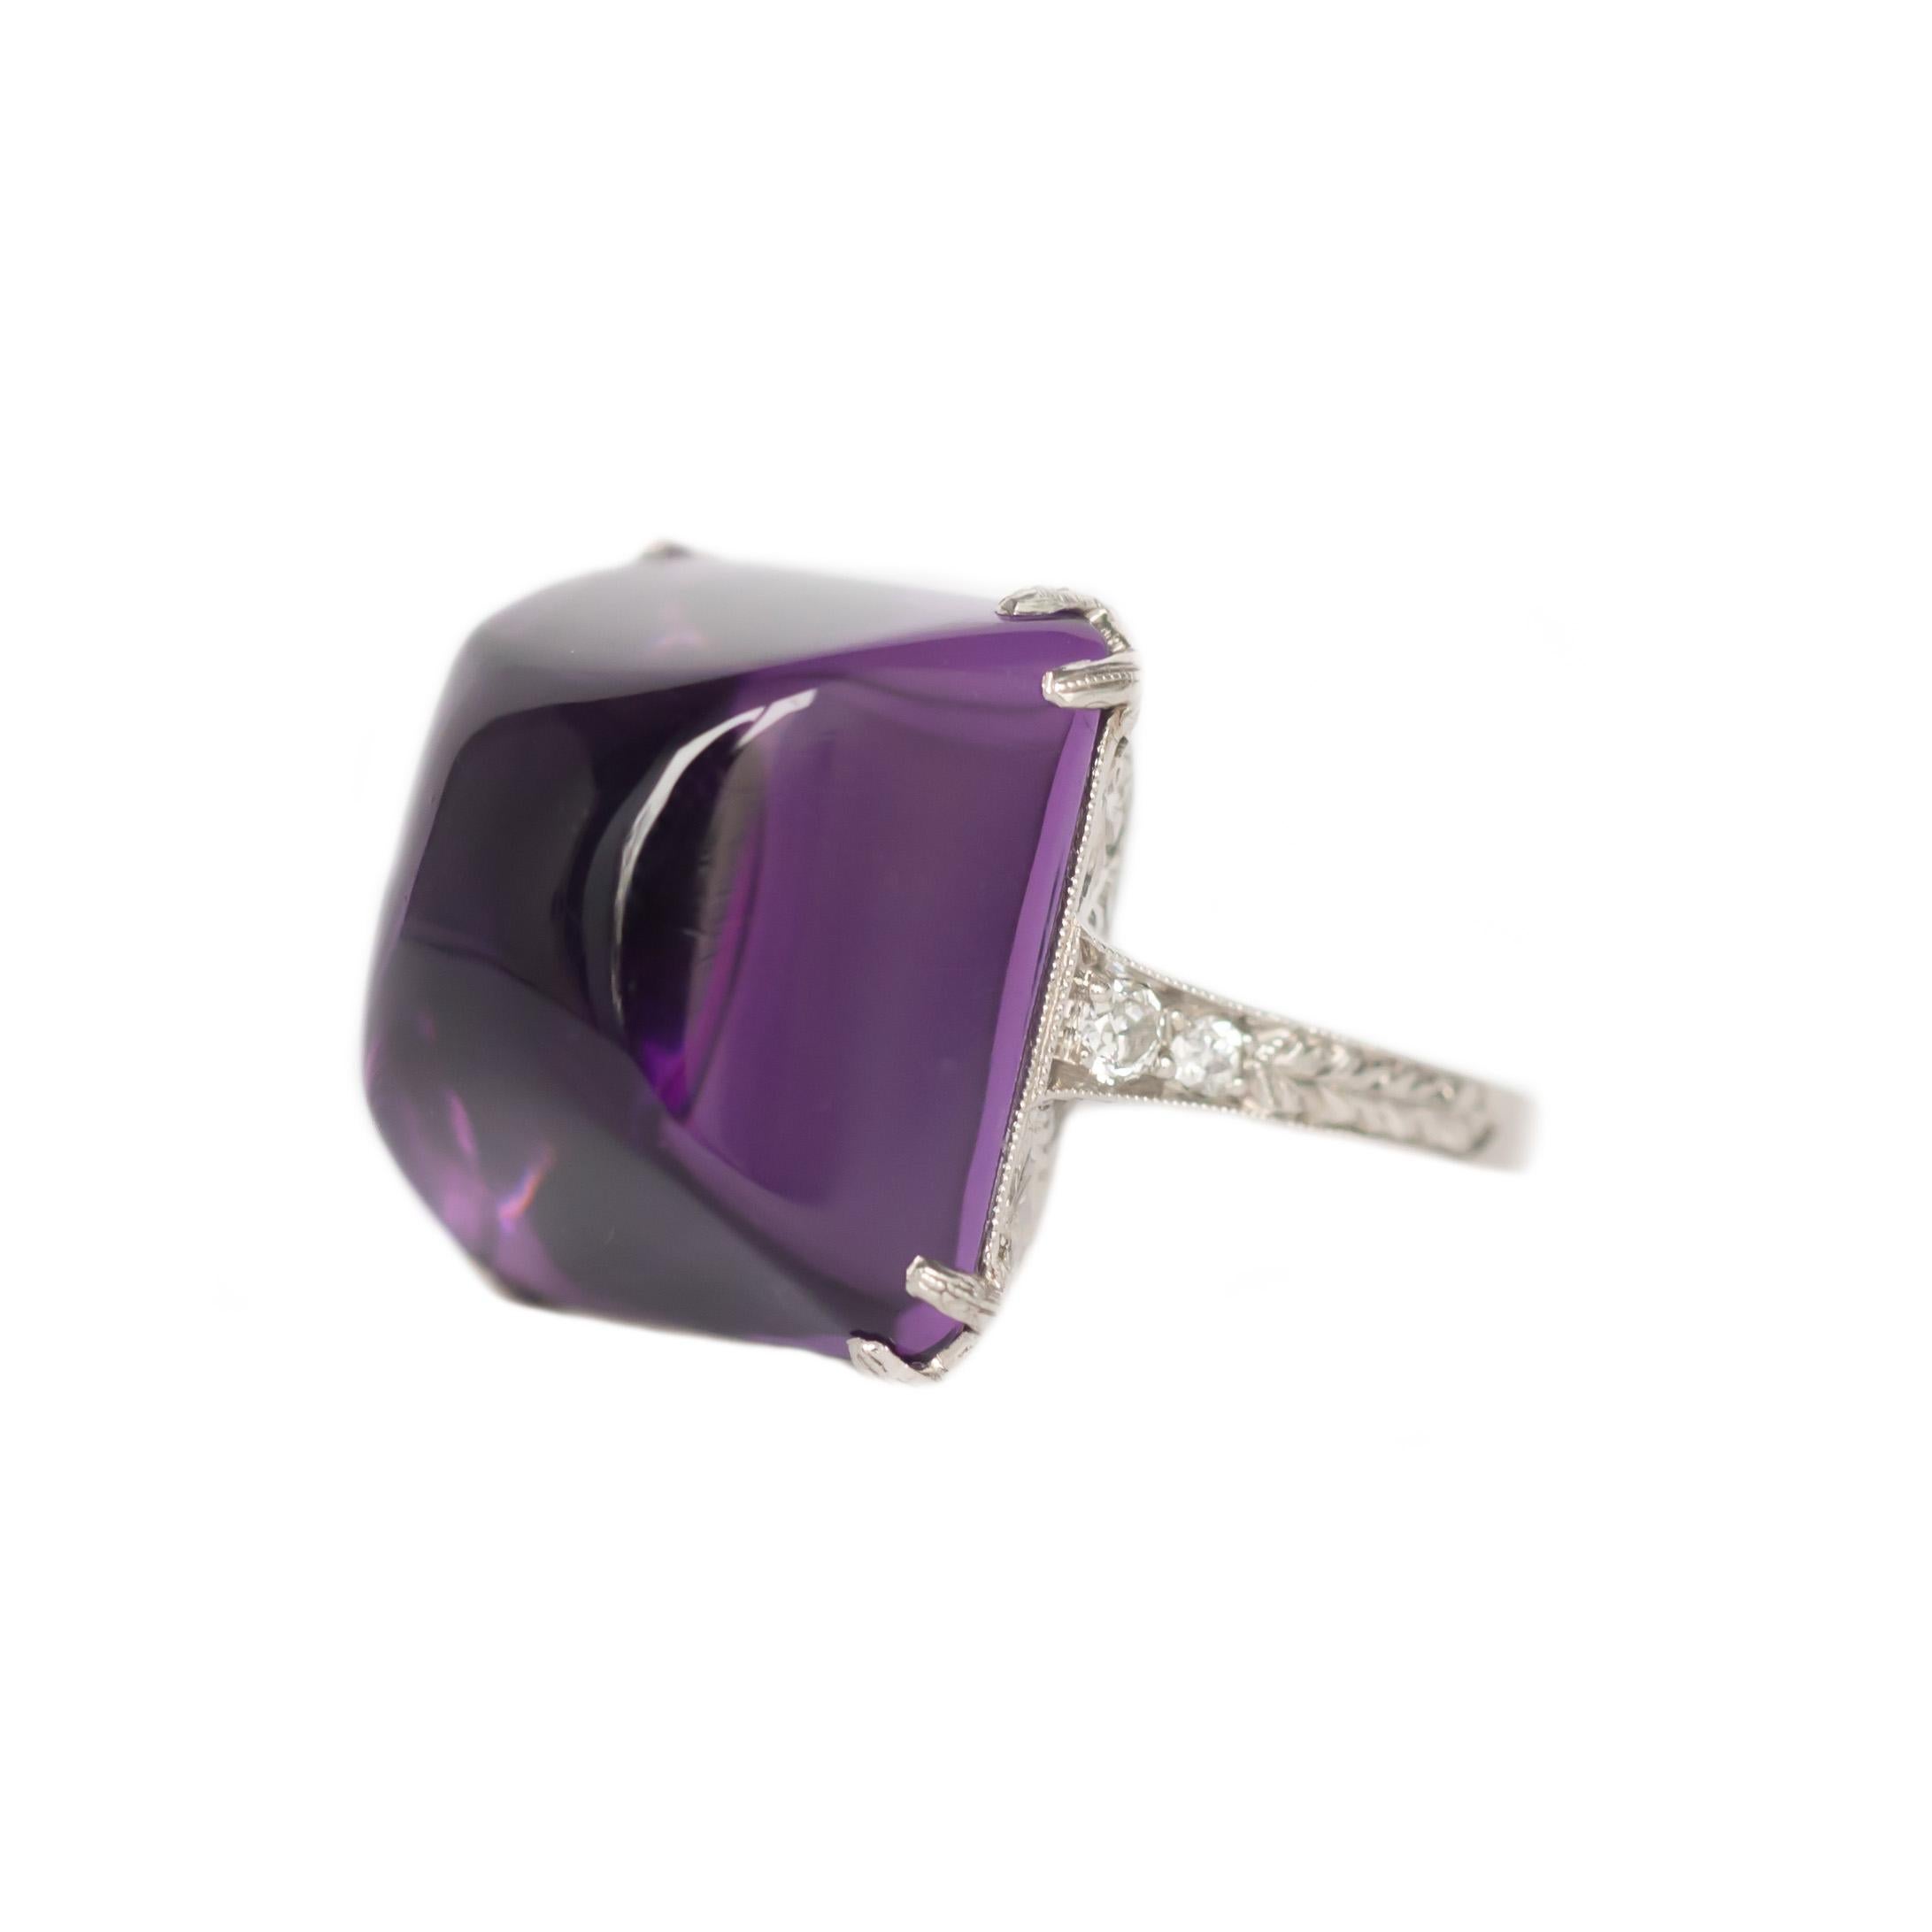 Ring Size: 5.25
Metal Type:  Platinum [Hallmarked, and Tested]
Weight: 8.8  grams

Center Stone Details:
Type: Amethyst, Natural
GIA REPORT # 2205851670
Weight: Approximate 10 carat
Cut: Sugarloaf Cabachon
Color: Purple


Side Diamond